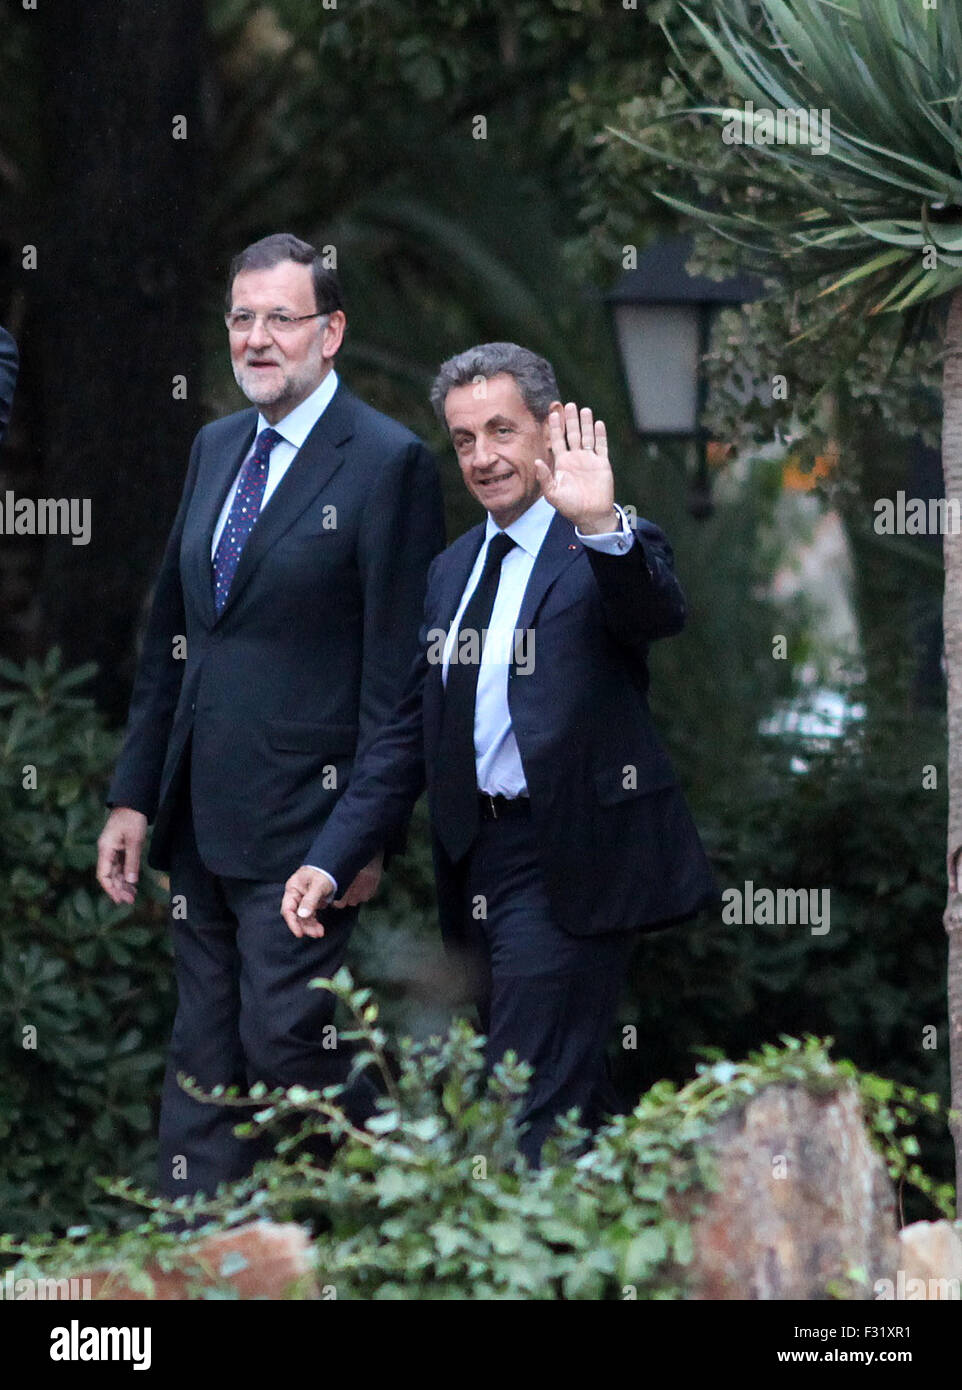 BARCELONA, SPAIN - SEPTEMBER 25: French former president Nicolas Sarkozy (R) and Spanish Prime Minister Mariano Rajoy (C) smile as they pose before the Catalonia's Popular Party (PP) final campaign meeting for the Catalan regional election, in Barcelona on September 25, 2015. Catalonia goes to the poles on September 27 with today ending one of the most intense electoral campaign ever known in post-Franco Spain as Catalonia plays its independence. in Barcelona, Spain, Friday, Sept. 25, 2015. Catalans vote Sunday in regional parliamentary elections that the breakaway camp hopes will give them a Stock Photo